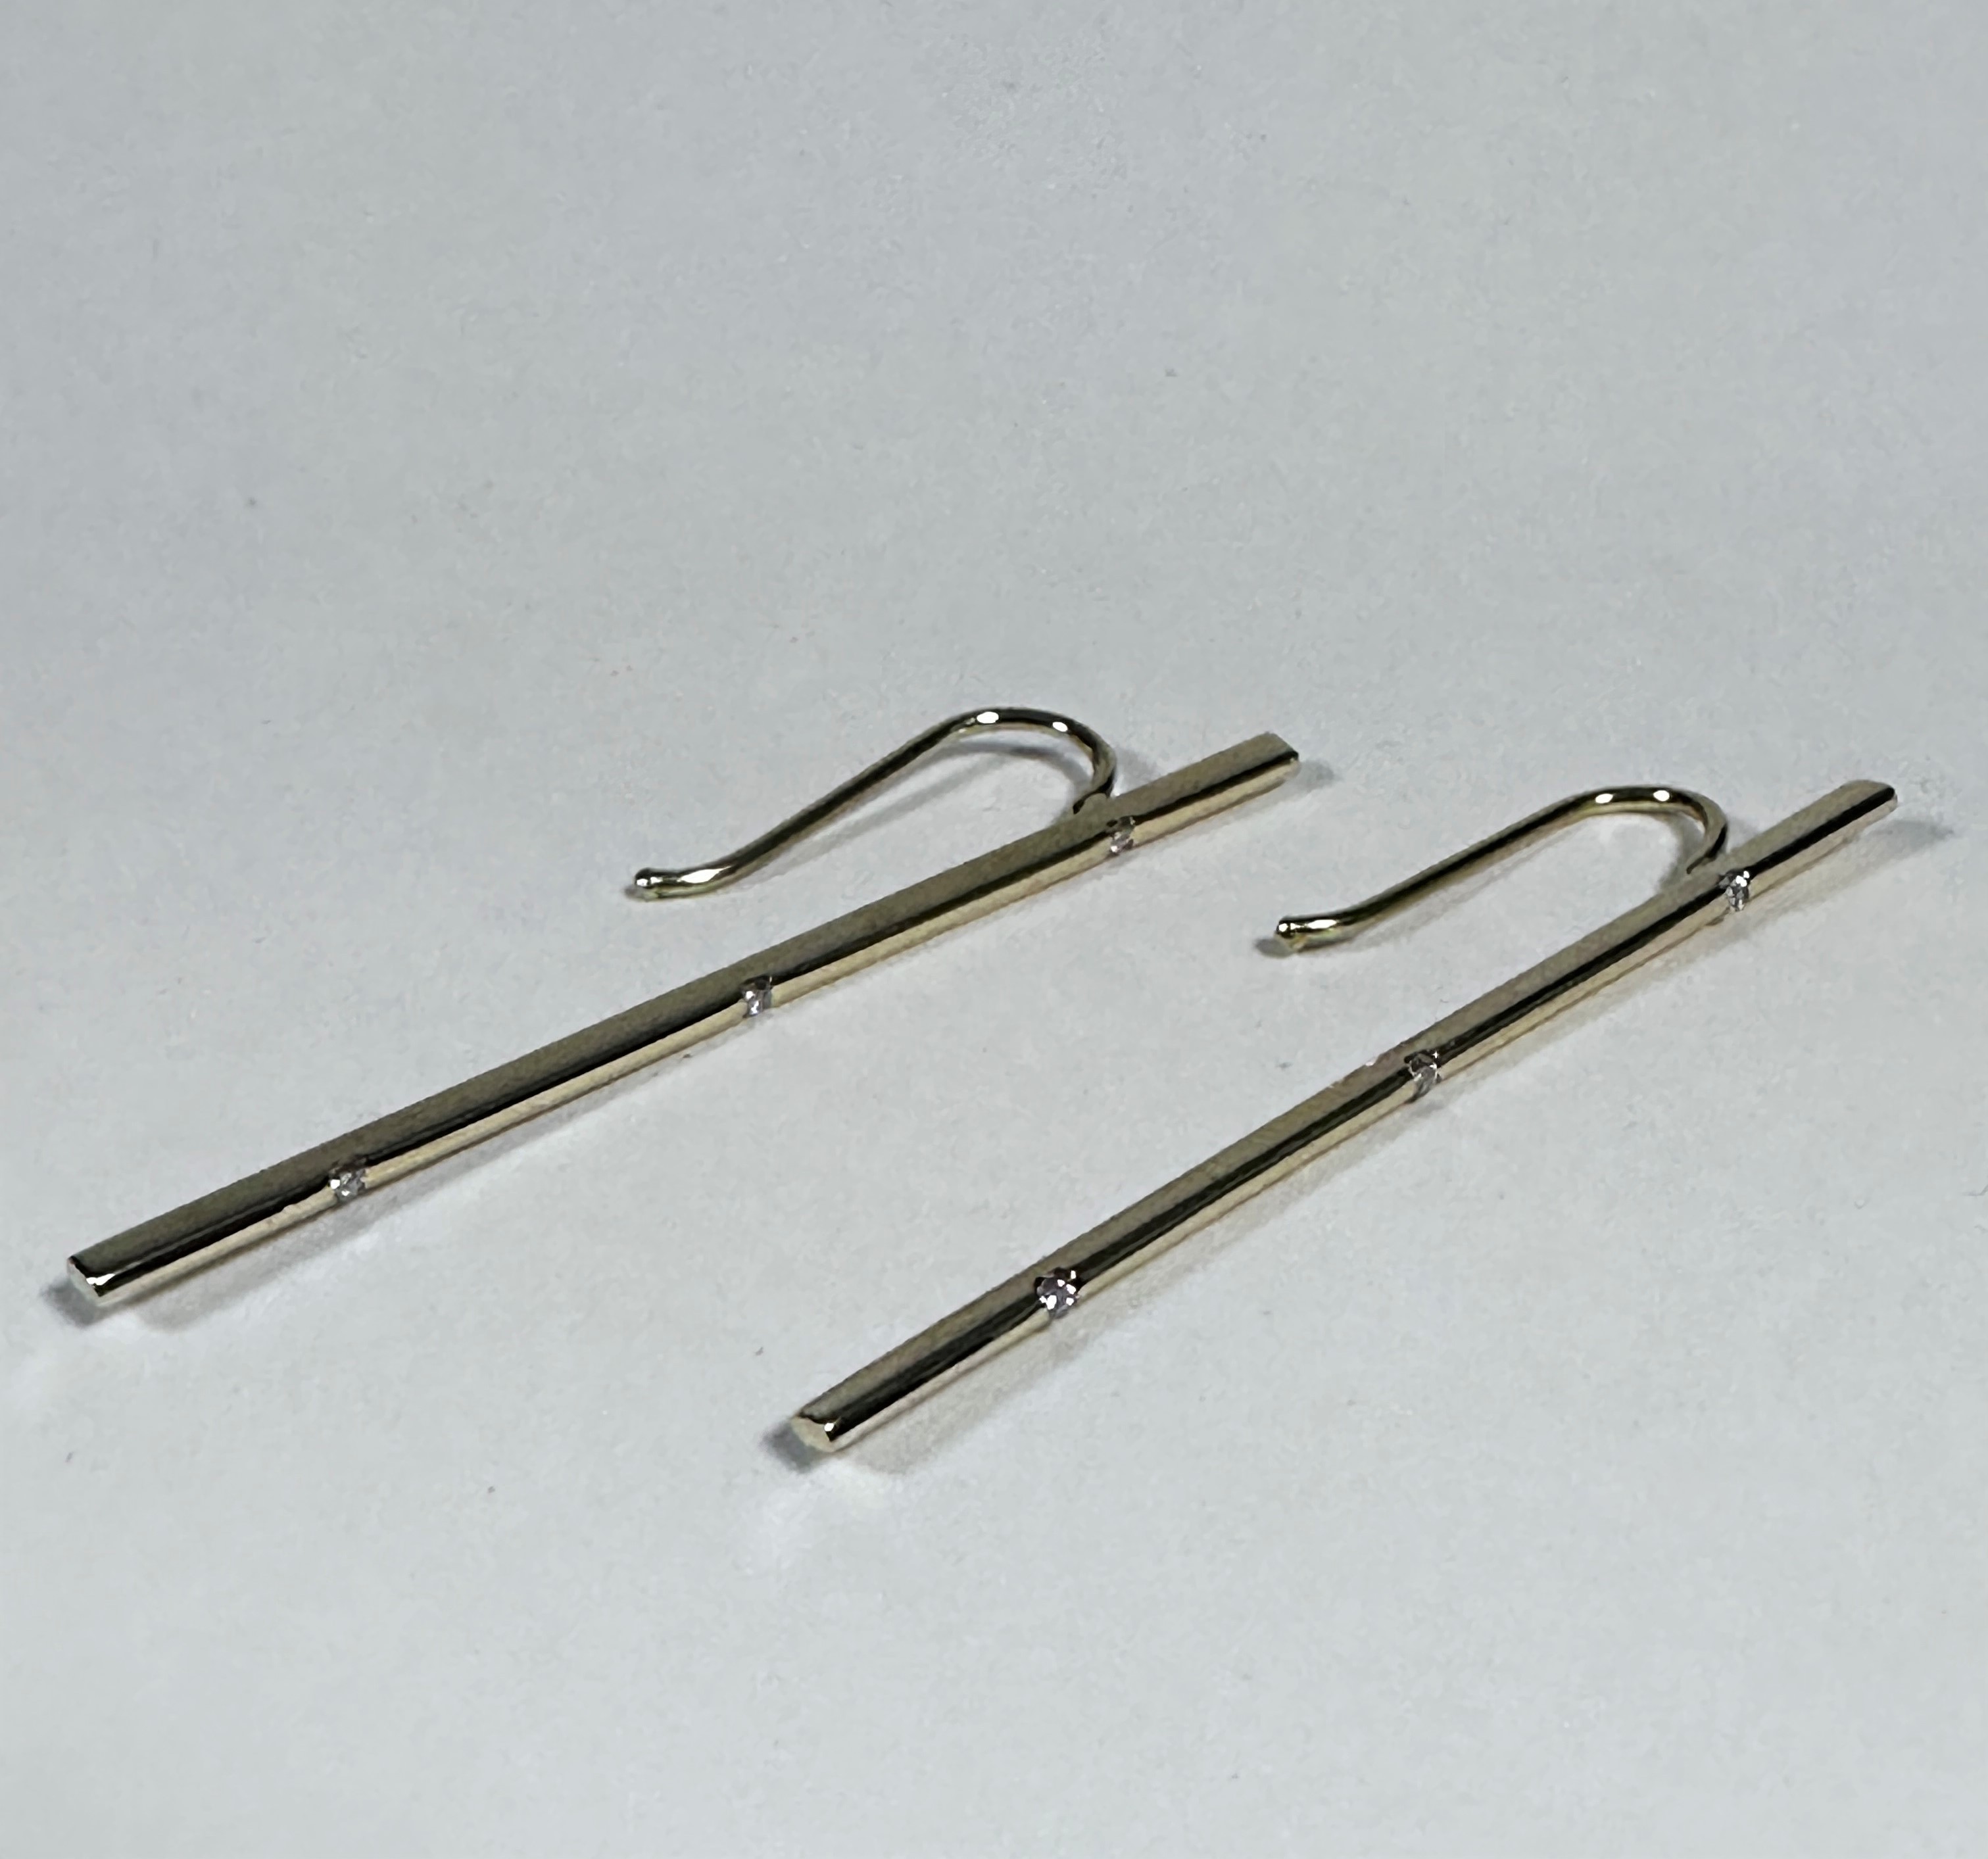 A pair of knife edge pendant drop earrings set three diamond points, with arched fittings, (L: 5cm x